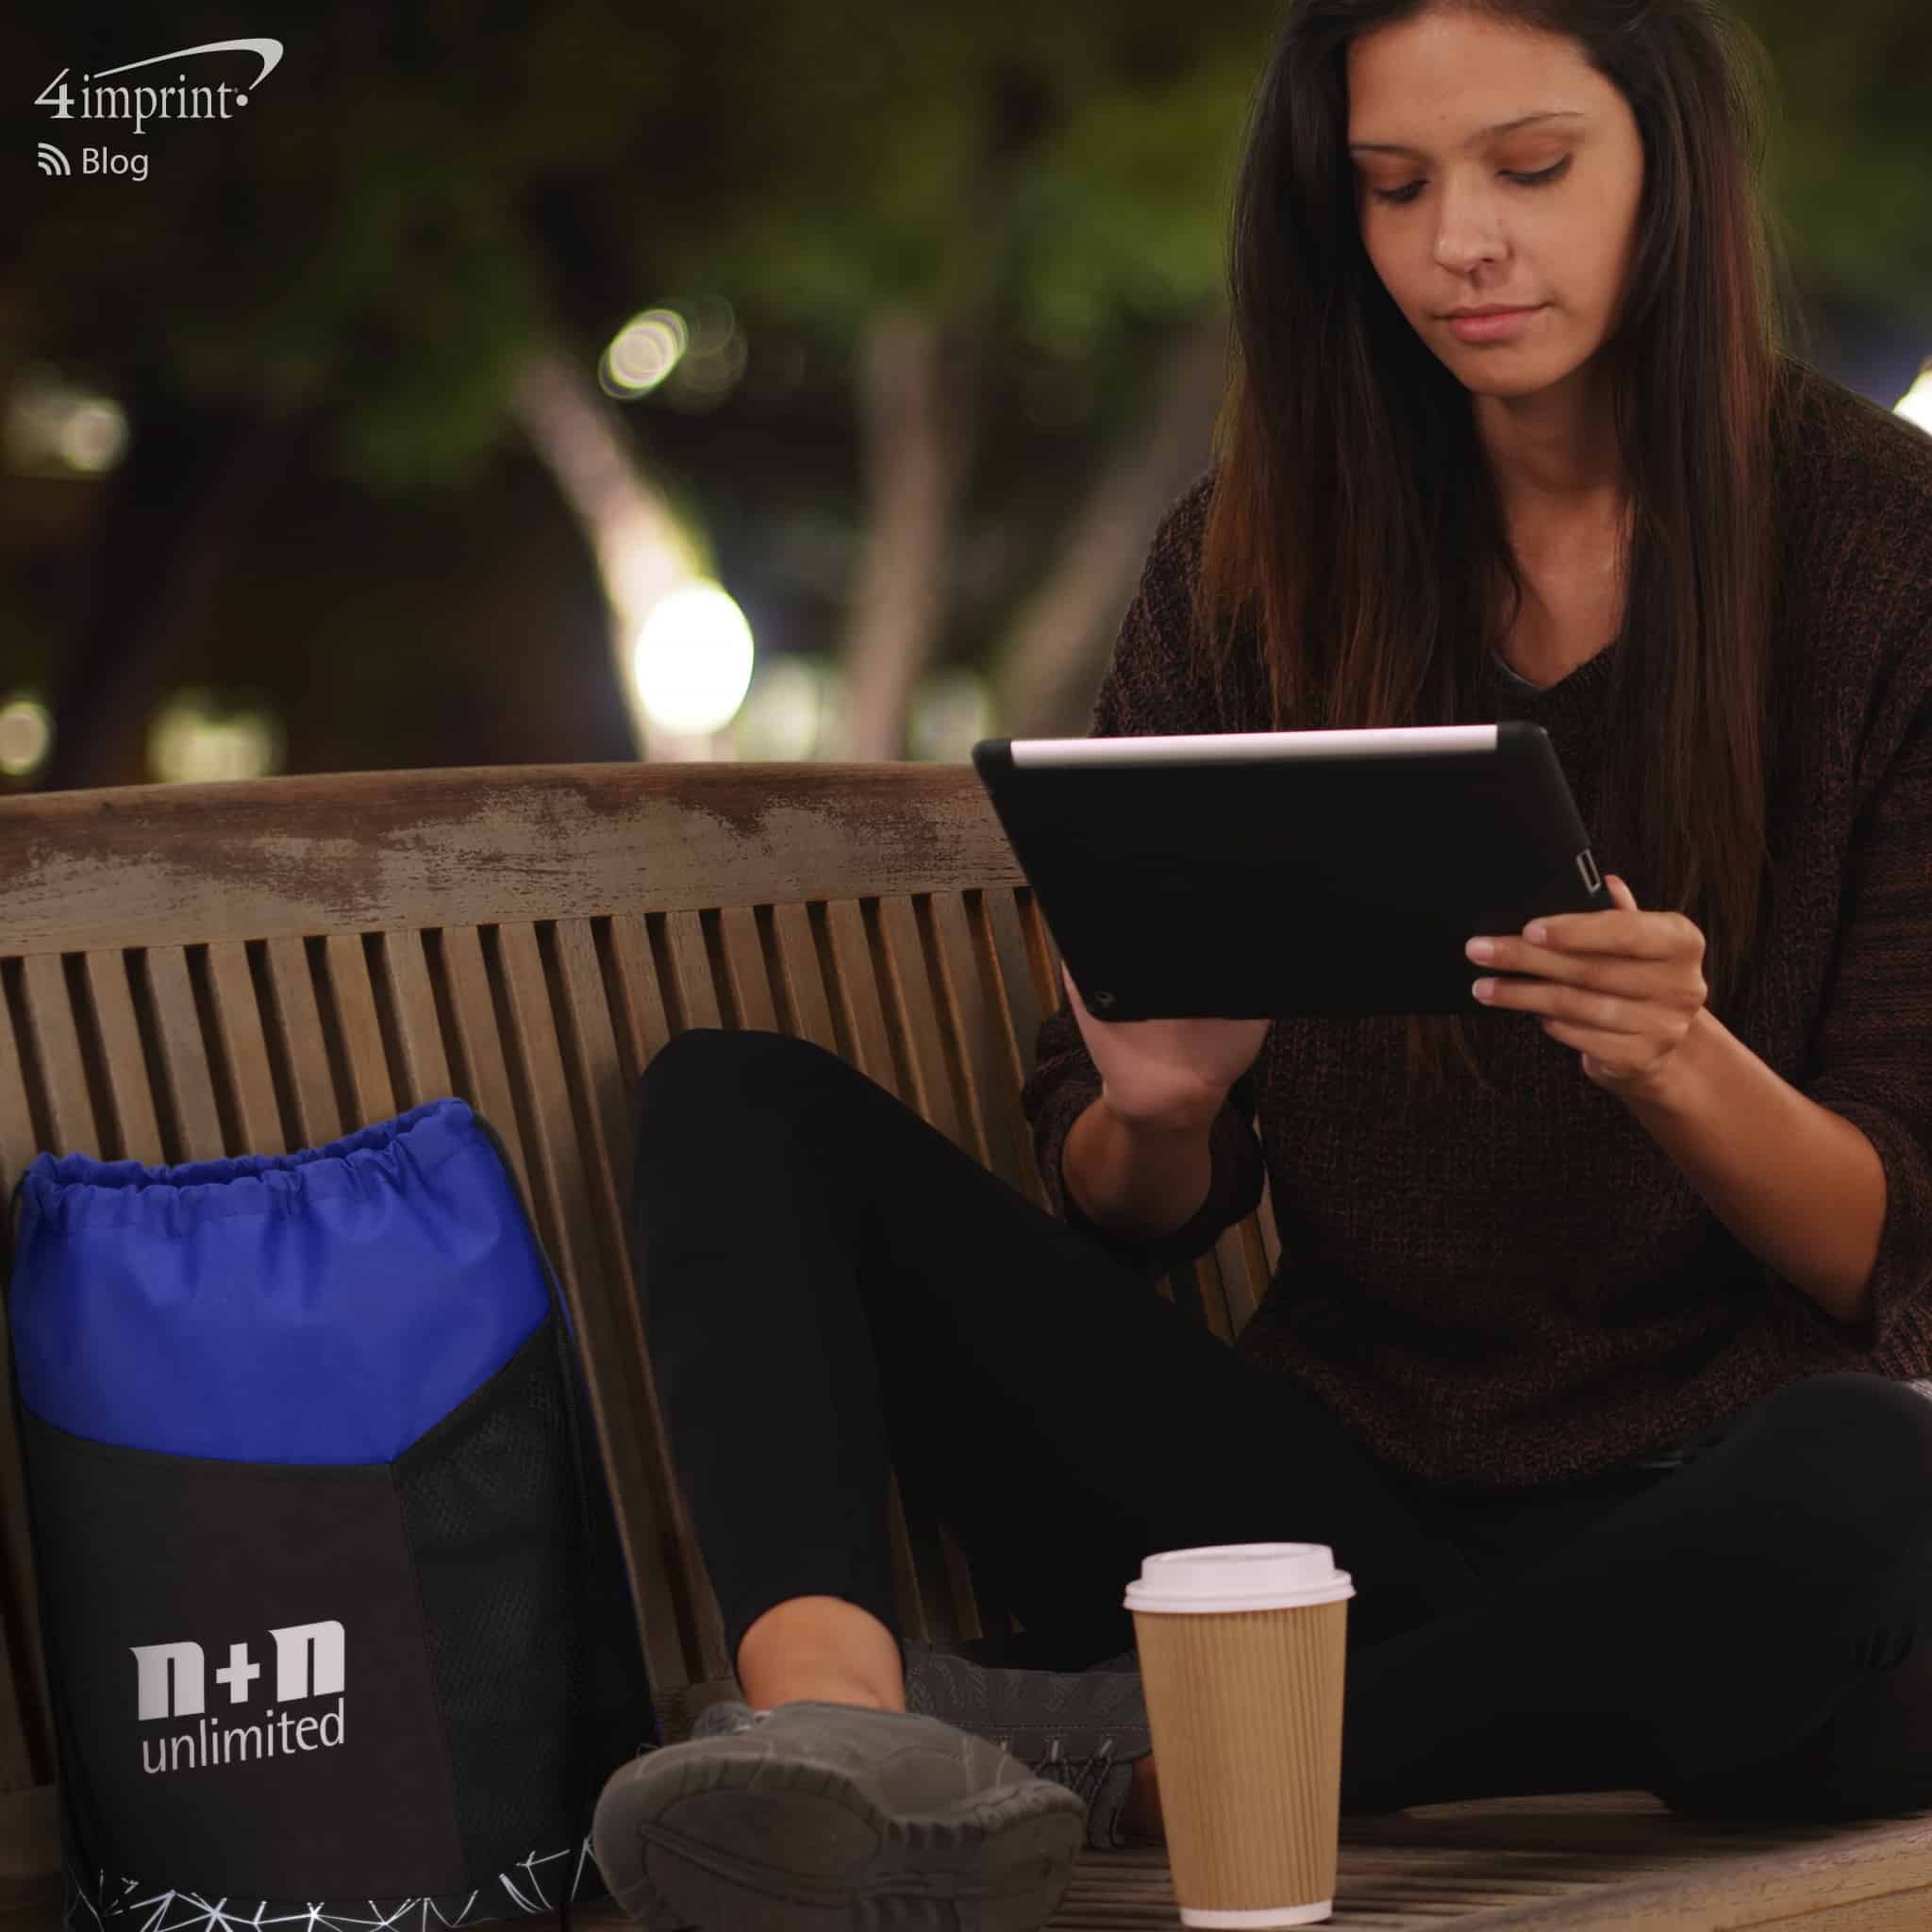 Picture of woman sitting on park bench at night with a branded bag next to her l 4imprint reflective promotional items